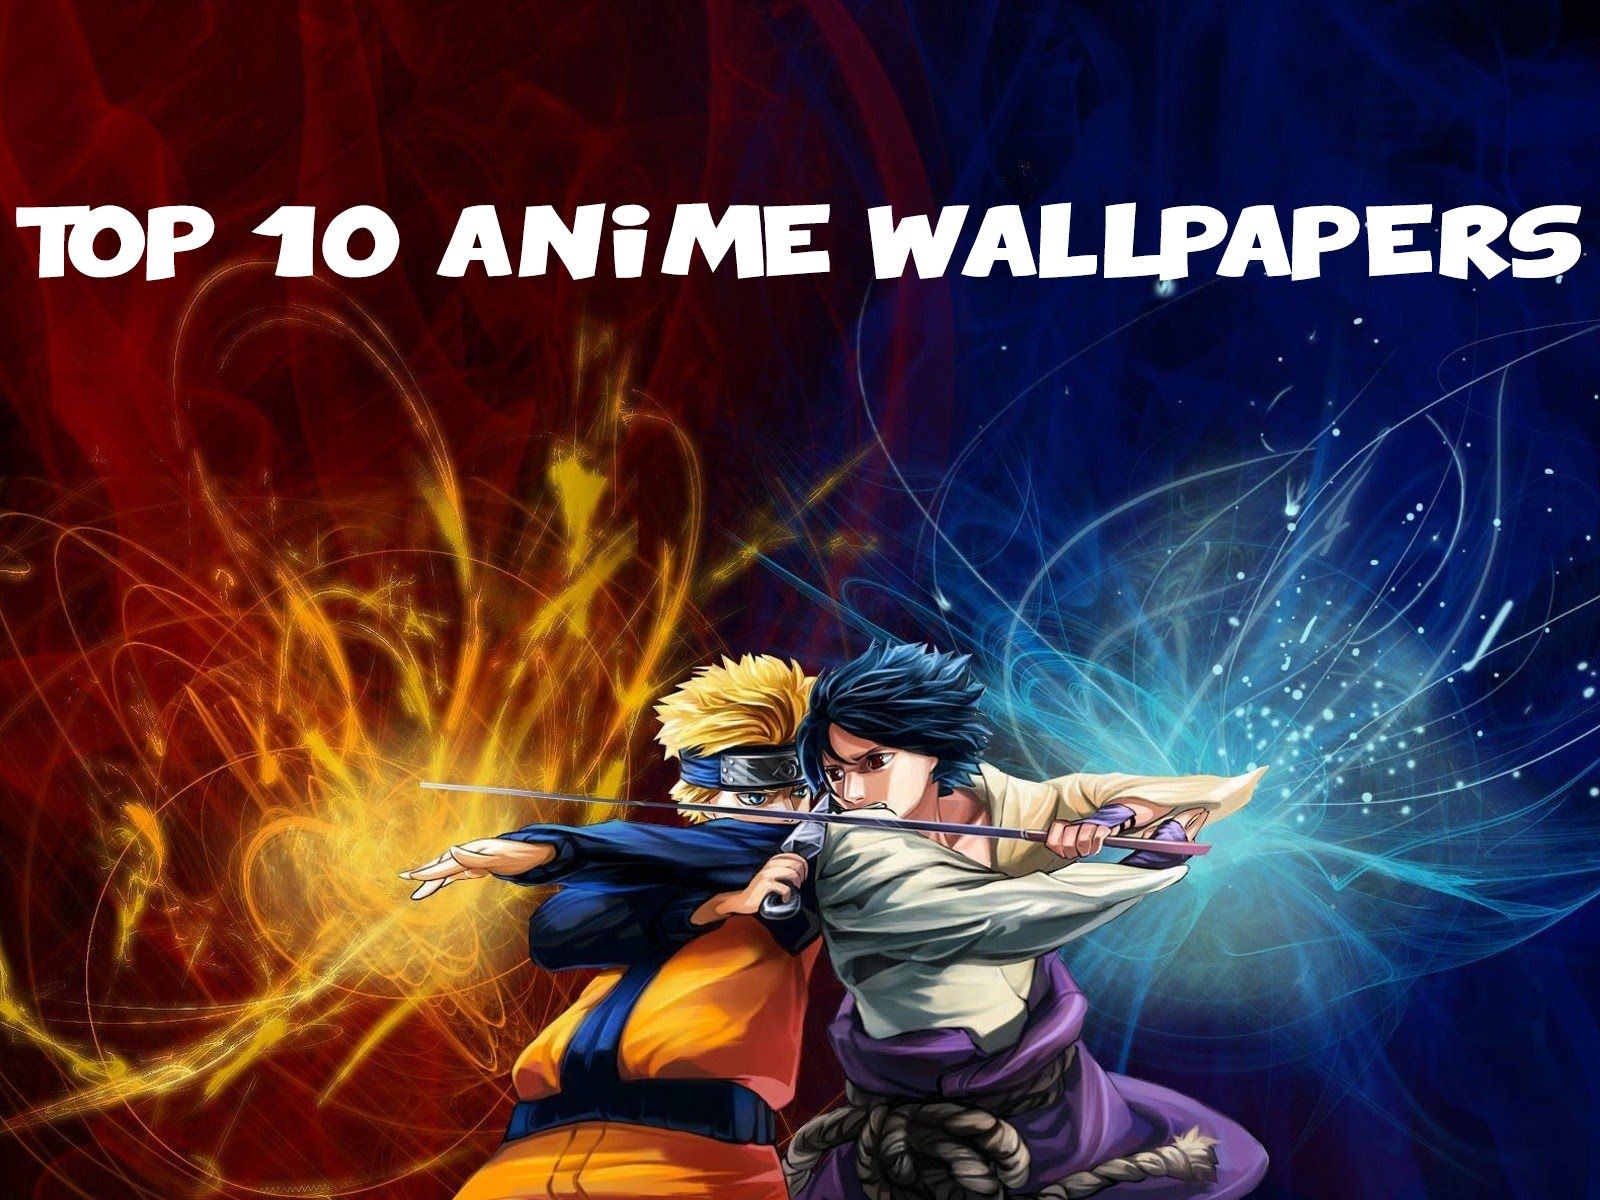 TOP 10 Anime Wallpapers! - YouTube